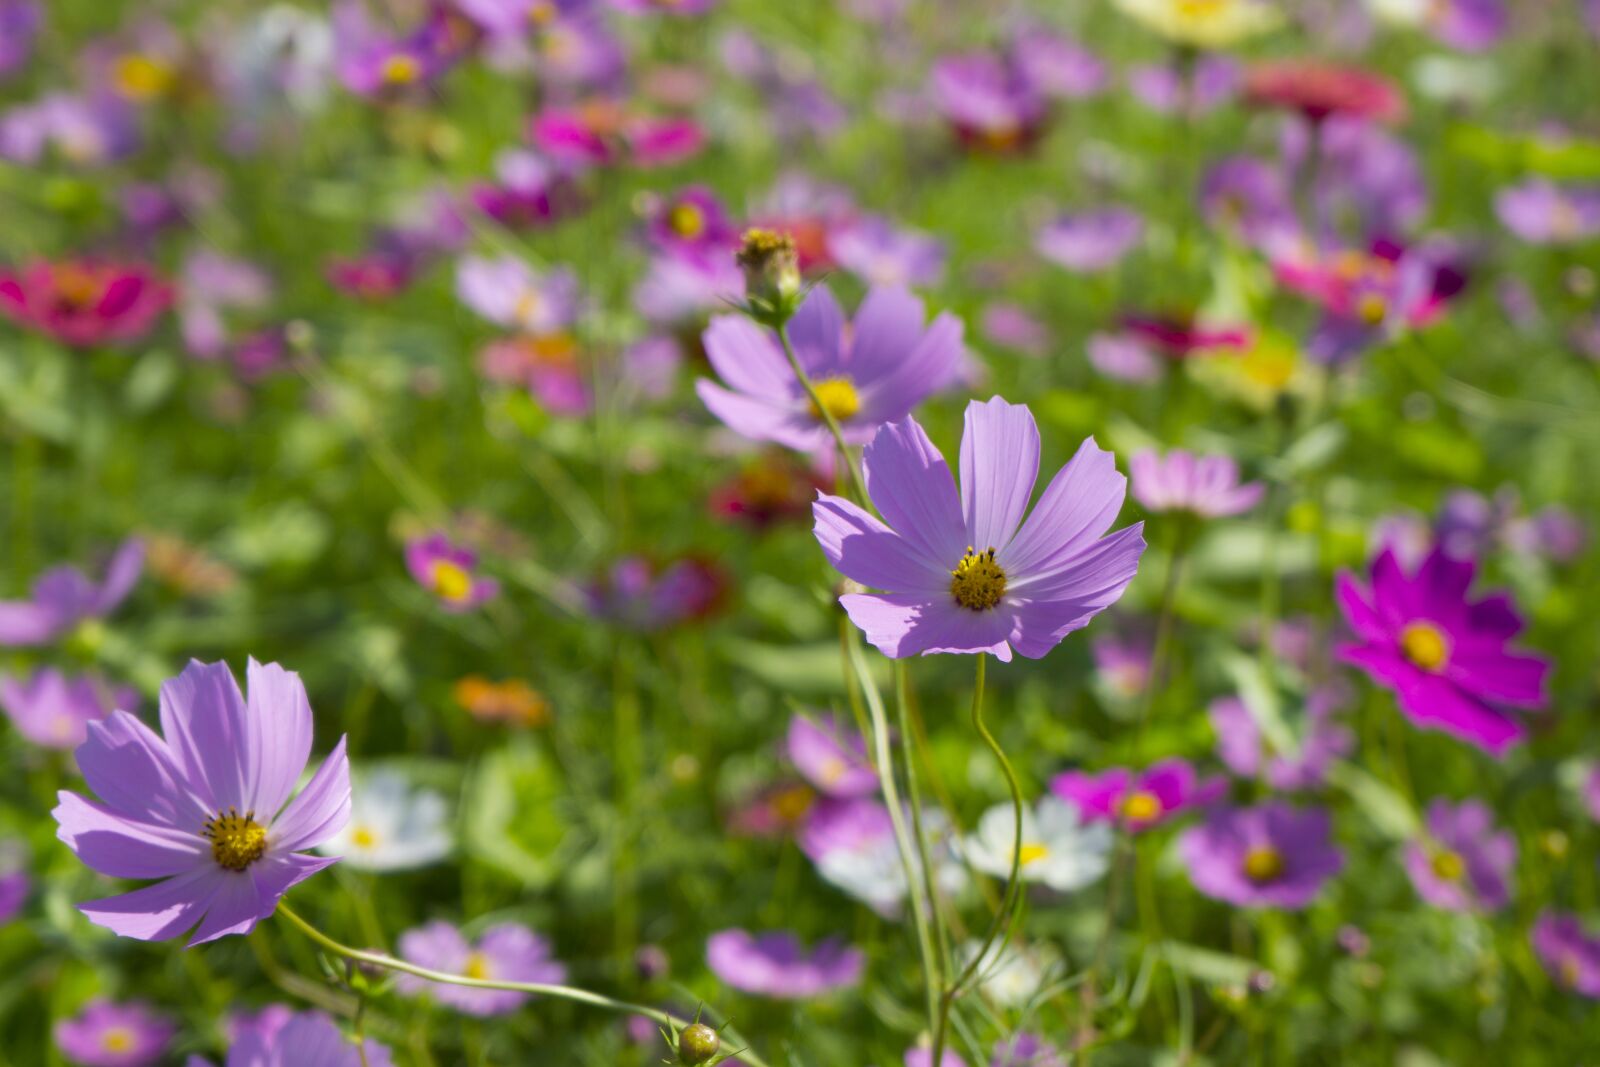 Sony a6000 sample photo. Cosmos, flowers, nature photography